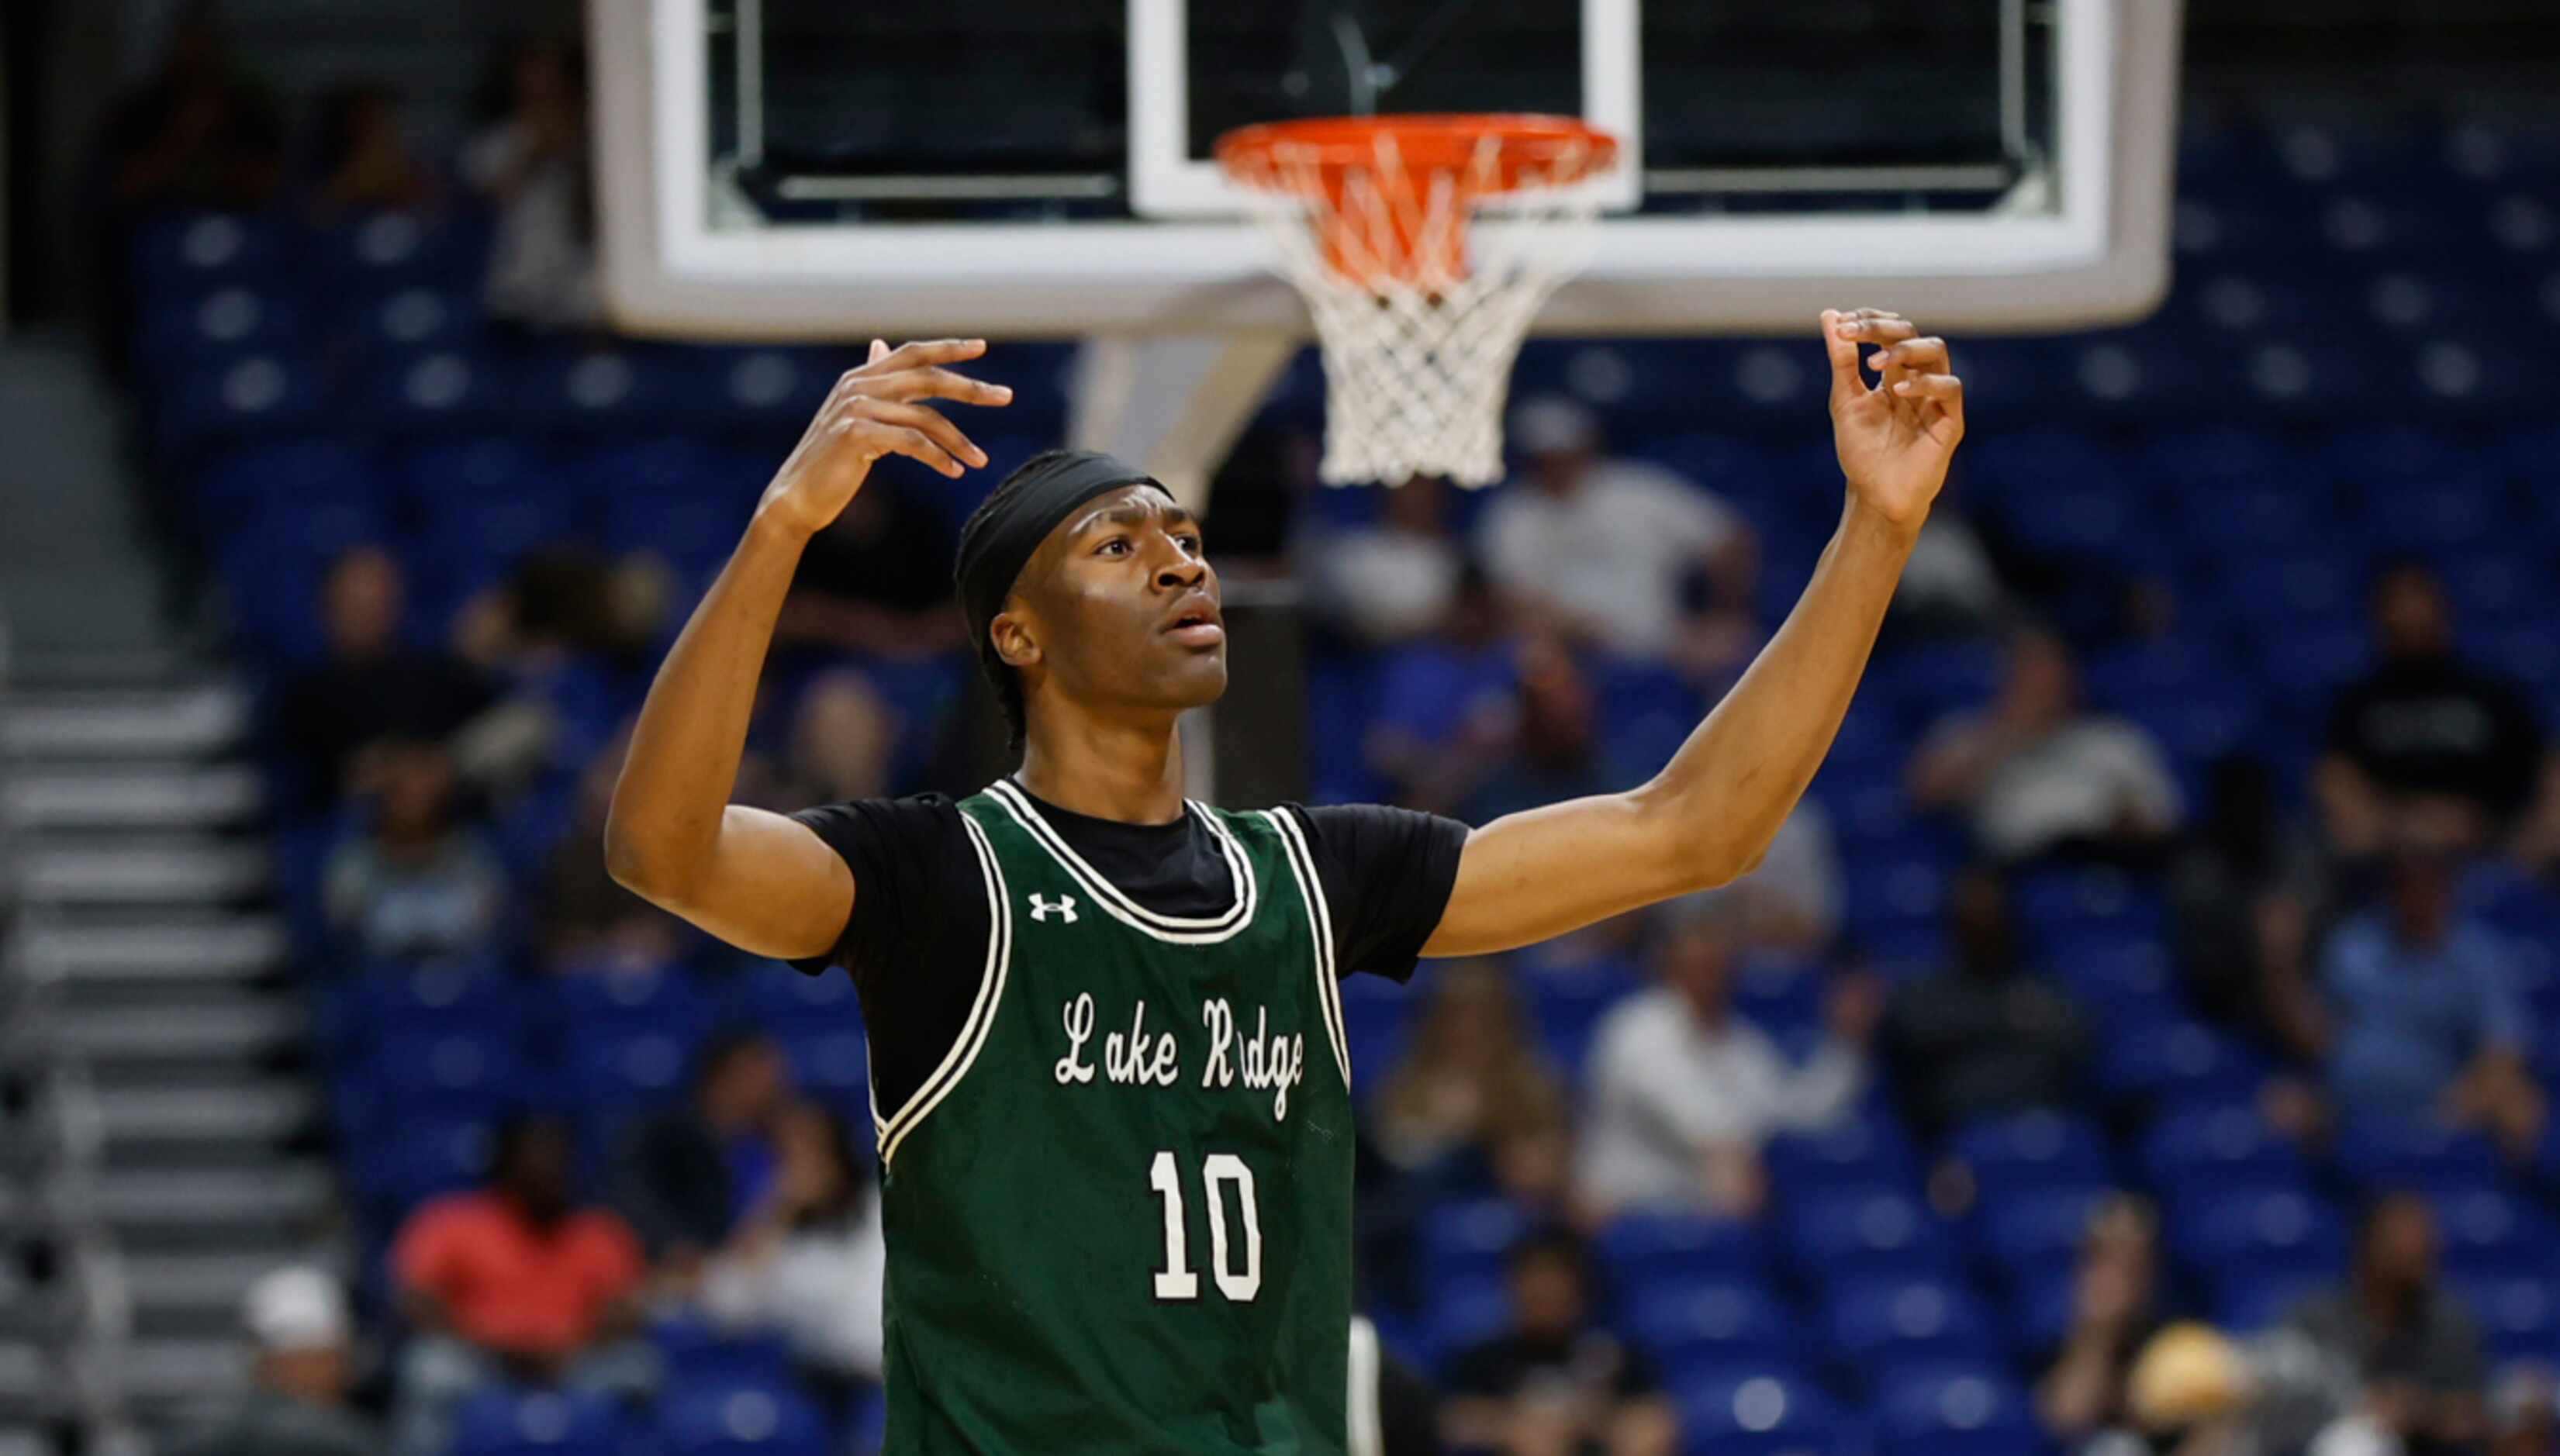 Mansfield Lake Ridge's Eze Nwakamma (10) reacts after a call went against his team in the...